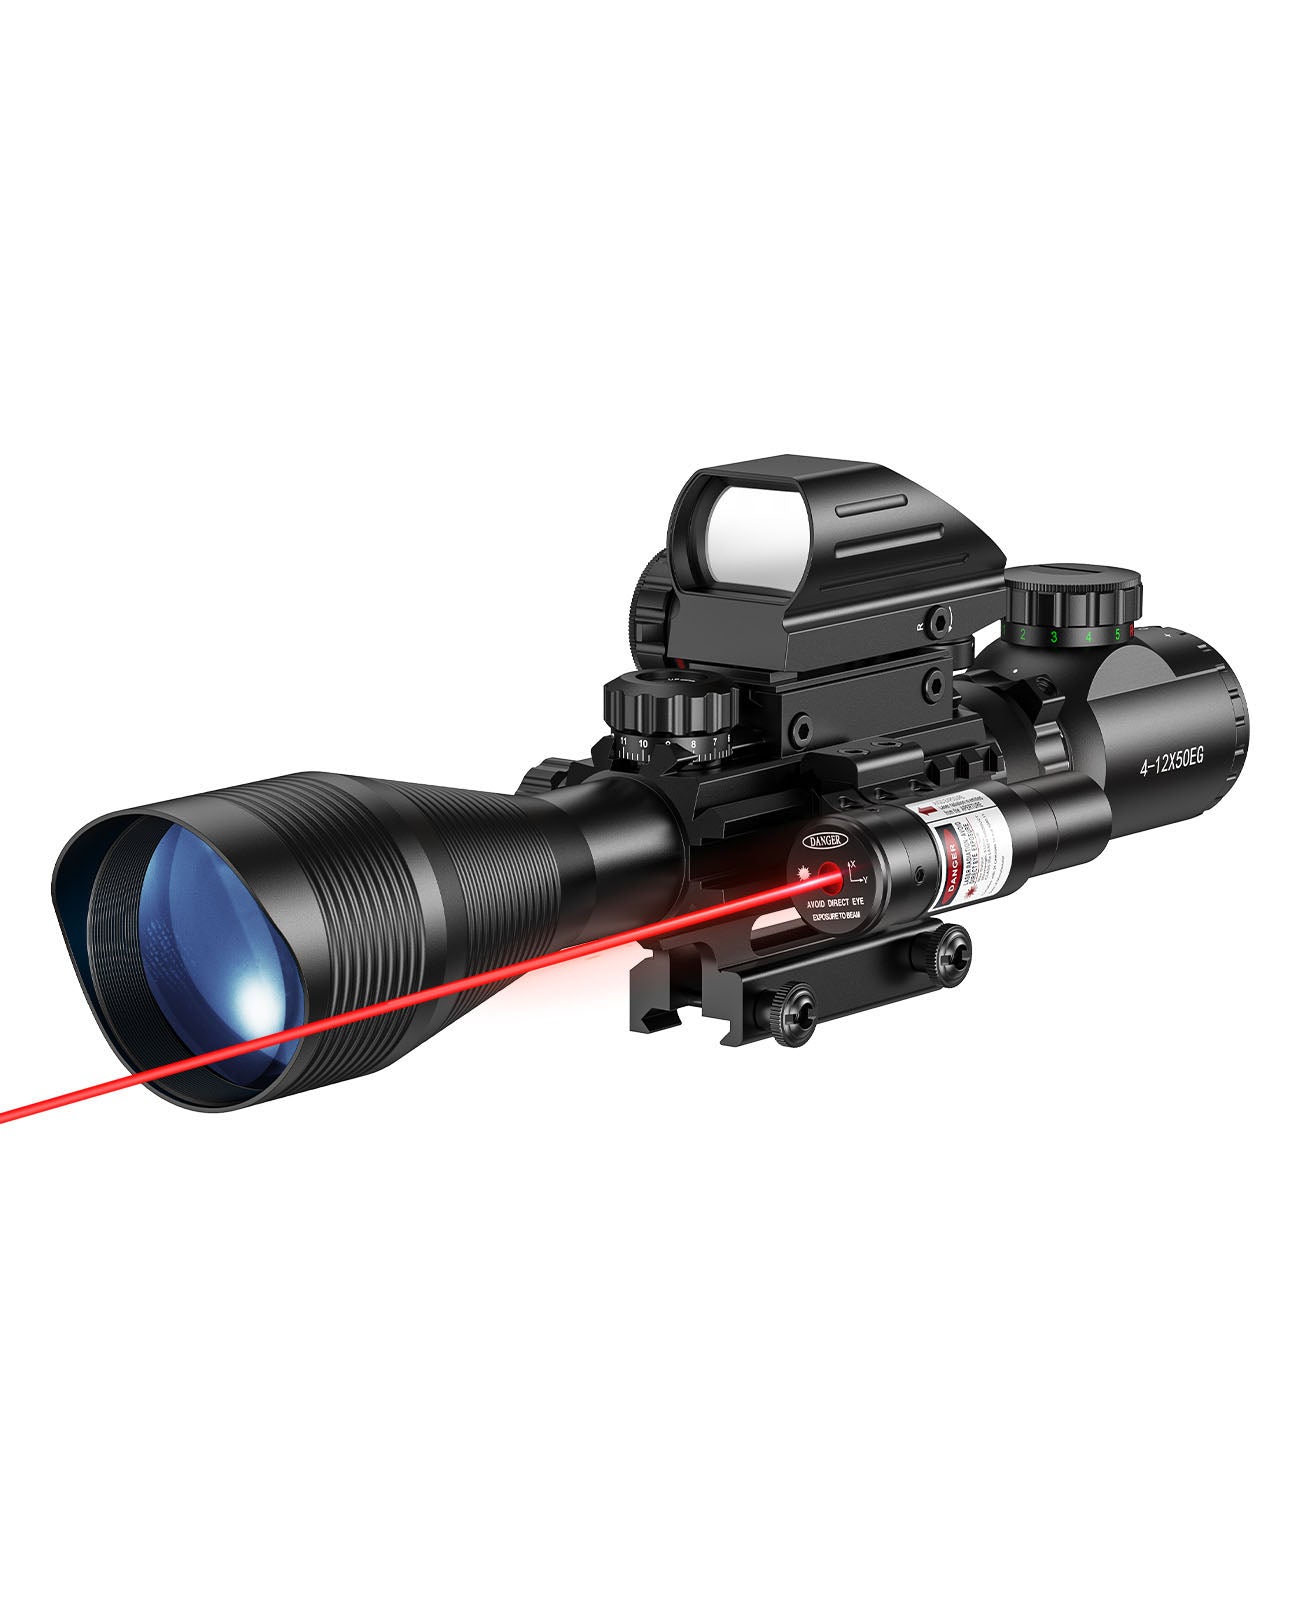 Riflescope Combo with Red Laser Sight and Dot Sight